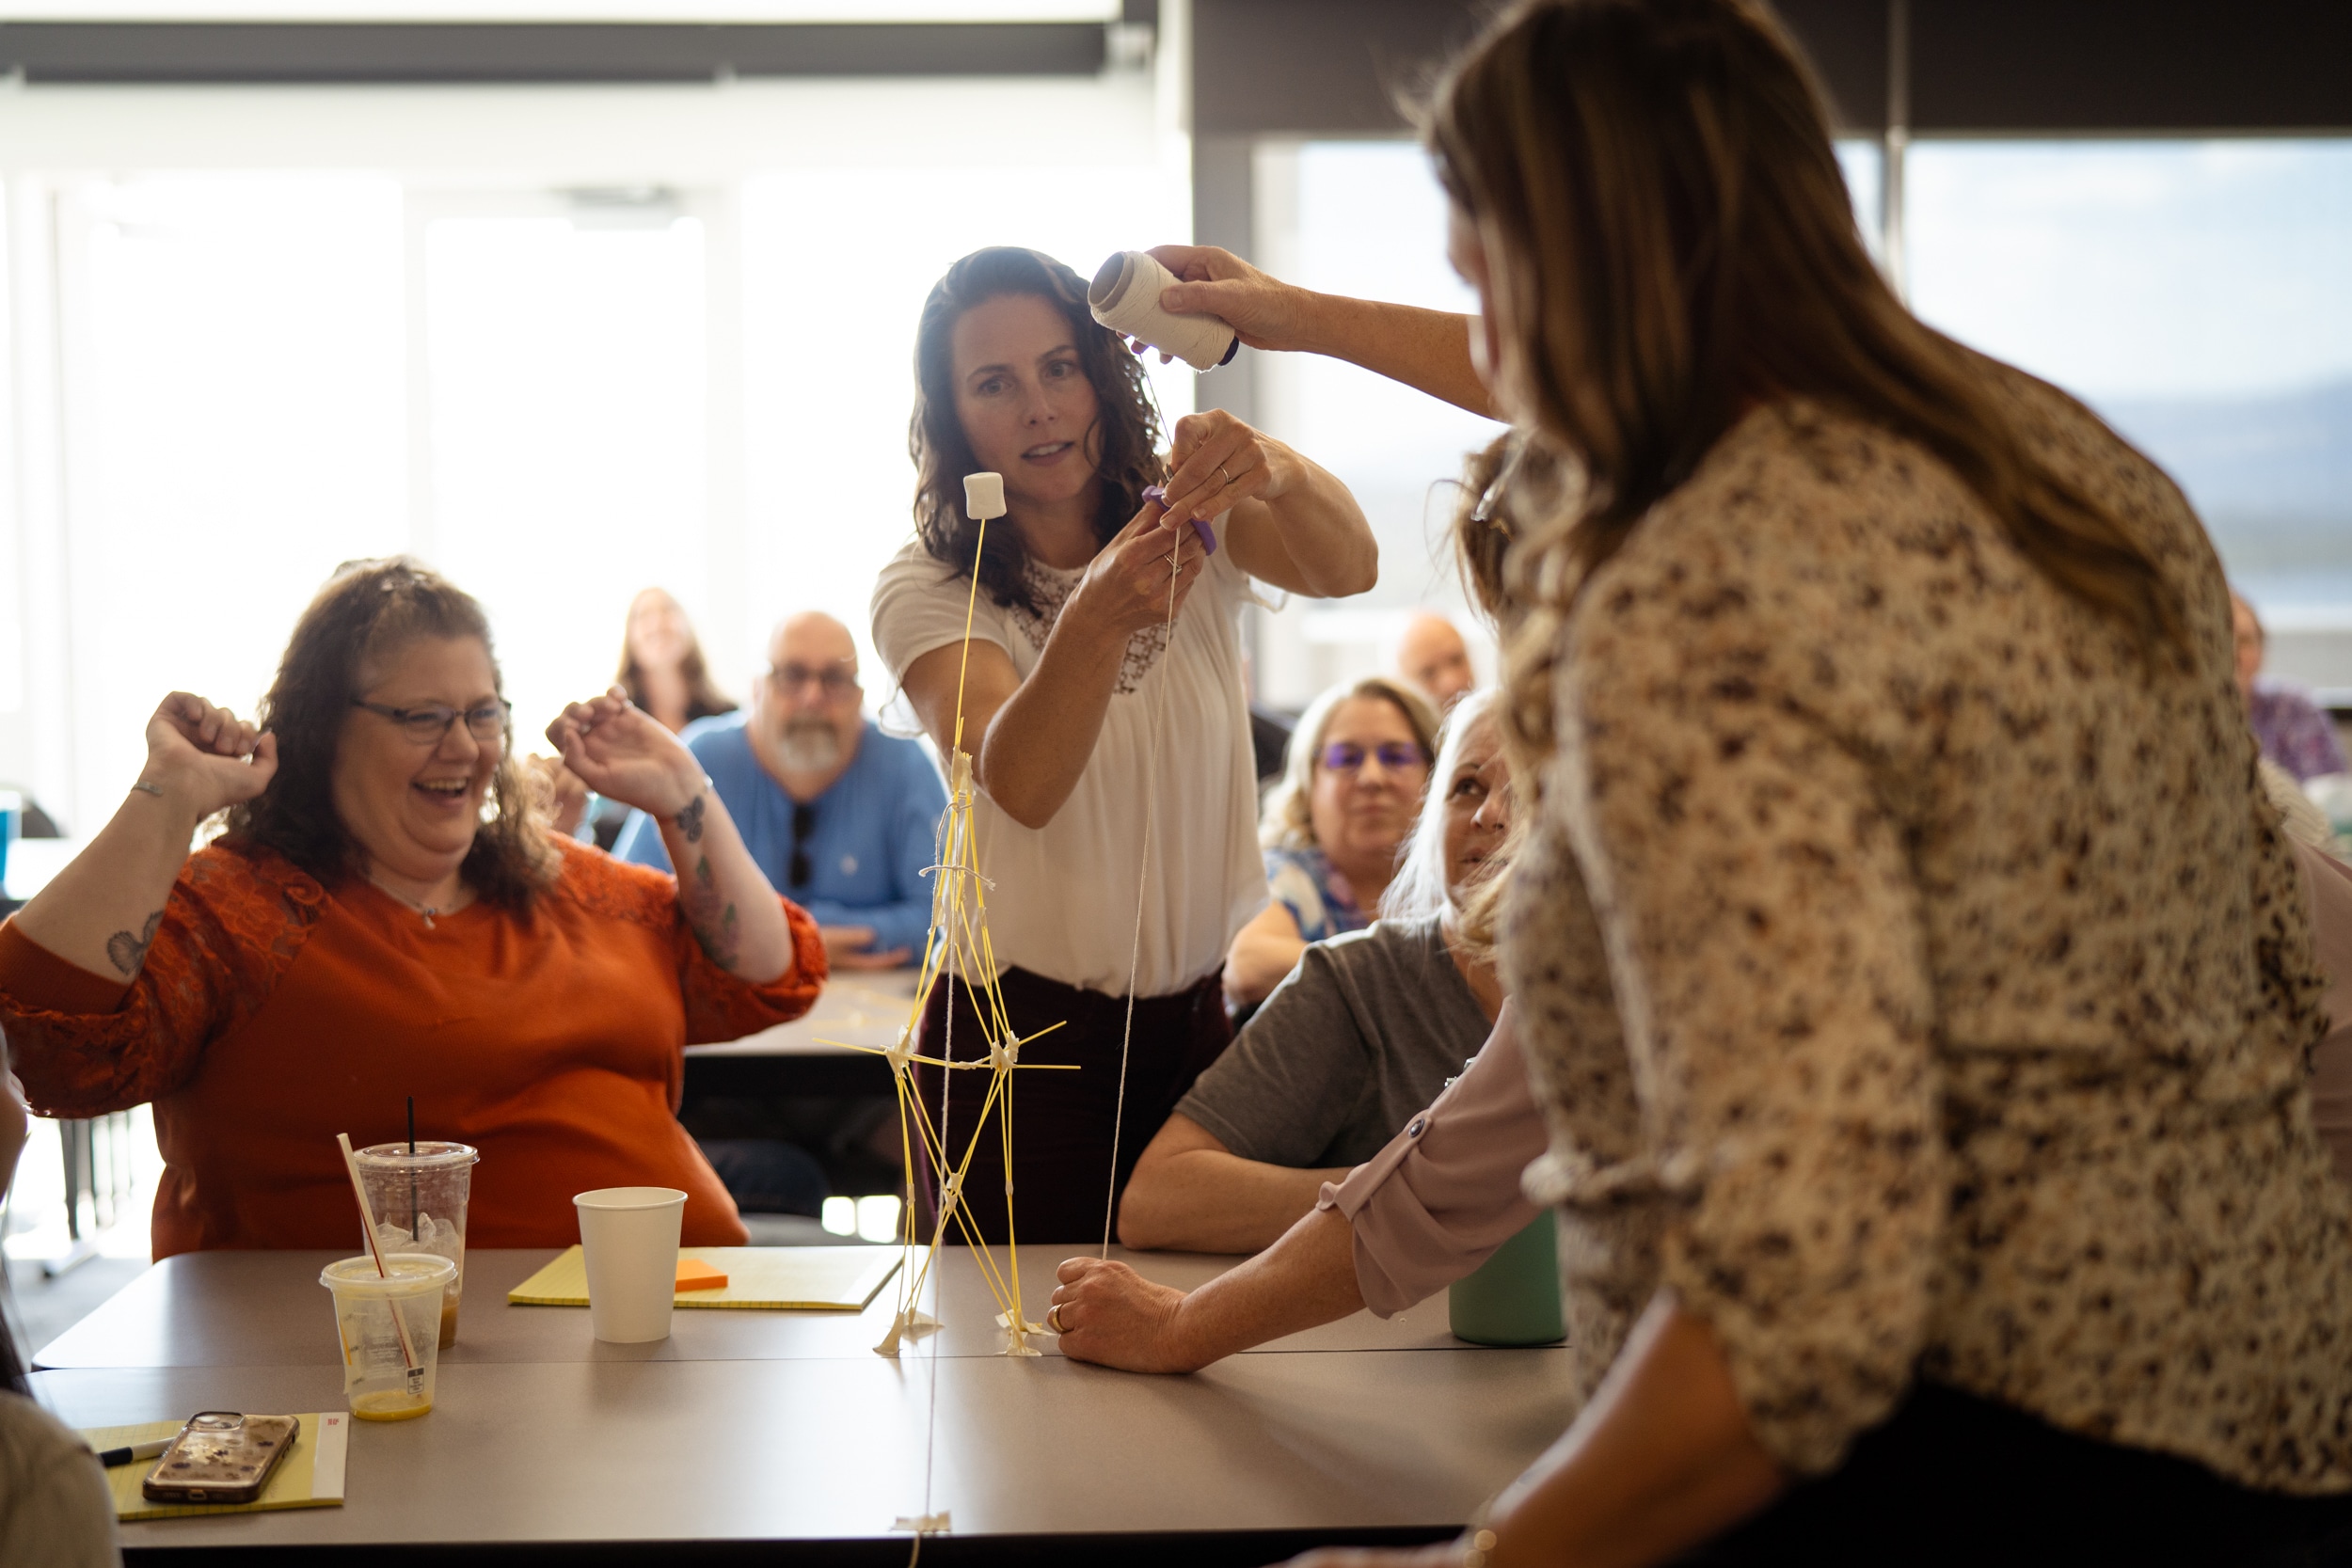 A carefully constructed tower made of spaghetti with a marshmallow on top is measured by a woman in a white shirt while other people look on.